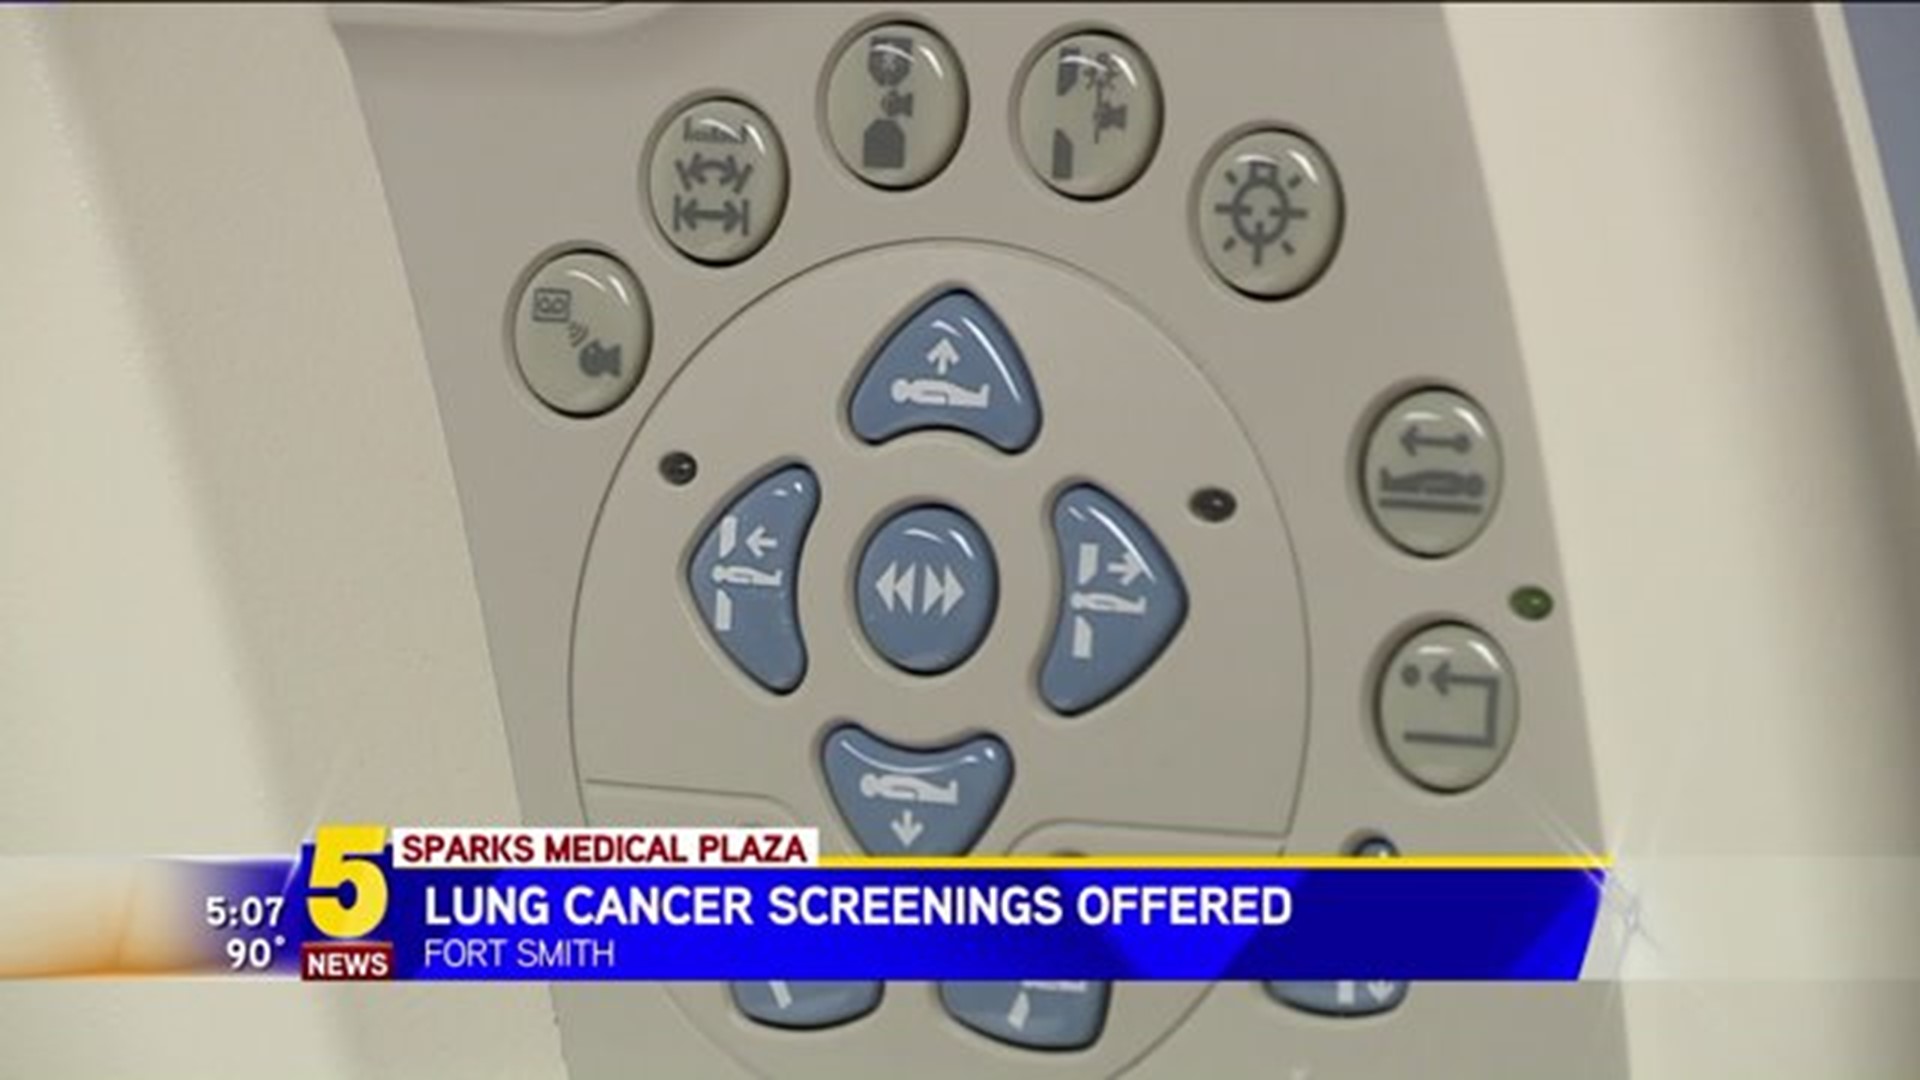 Lung Cancer Screenings Offered